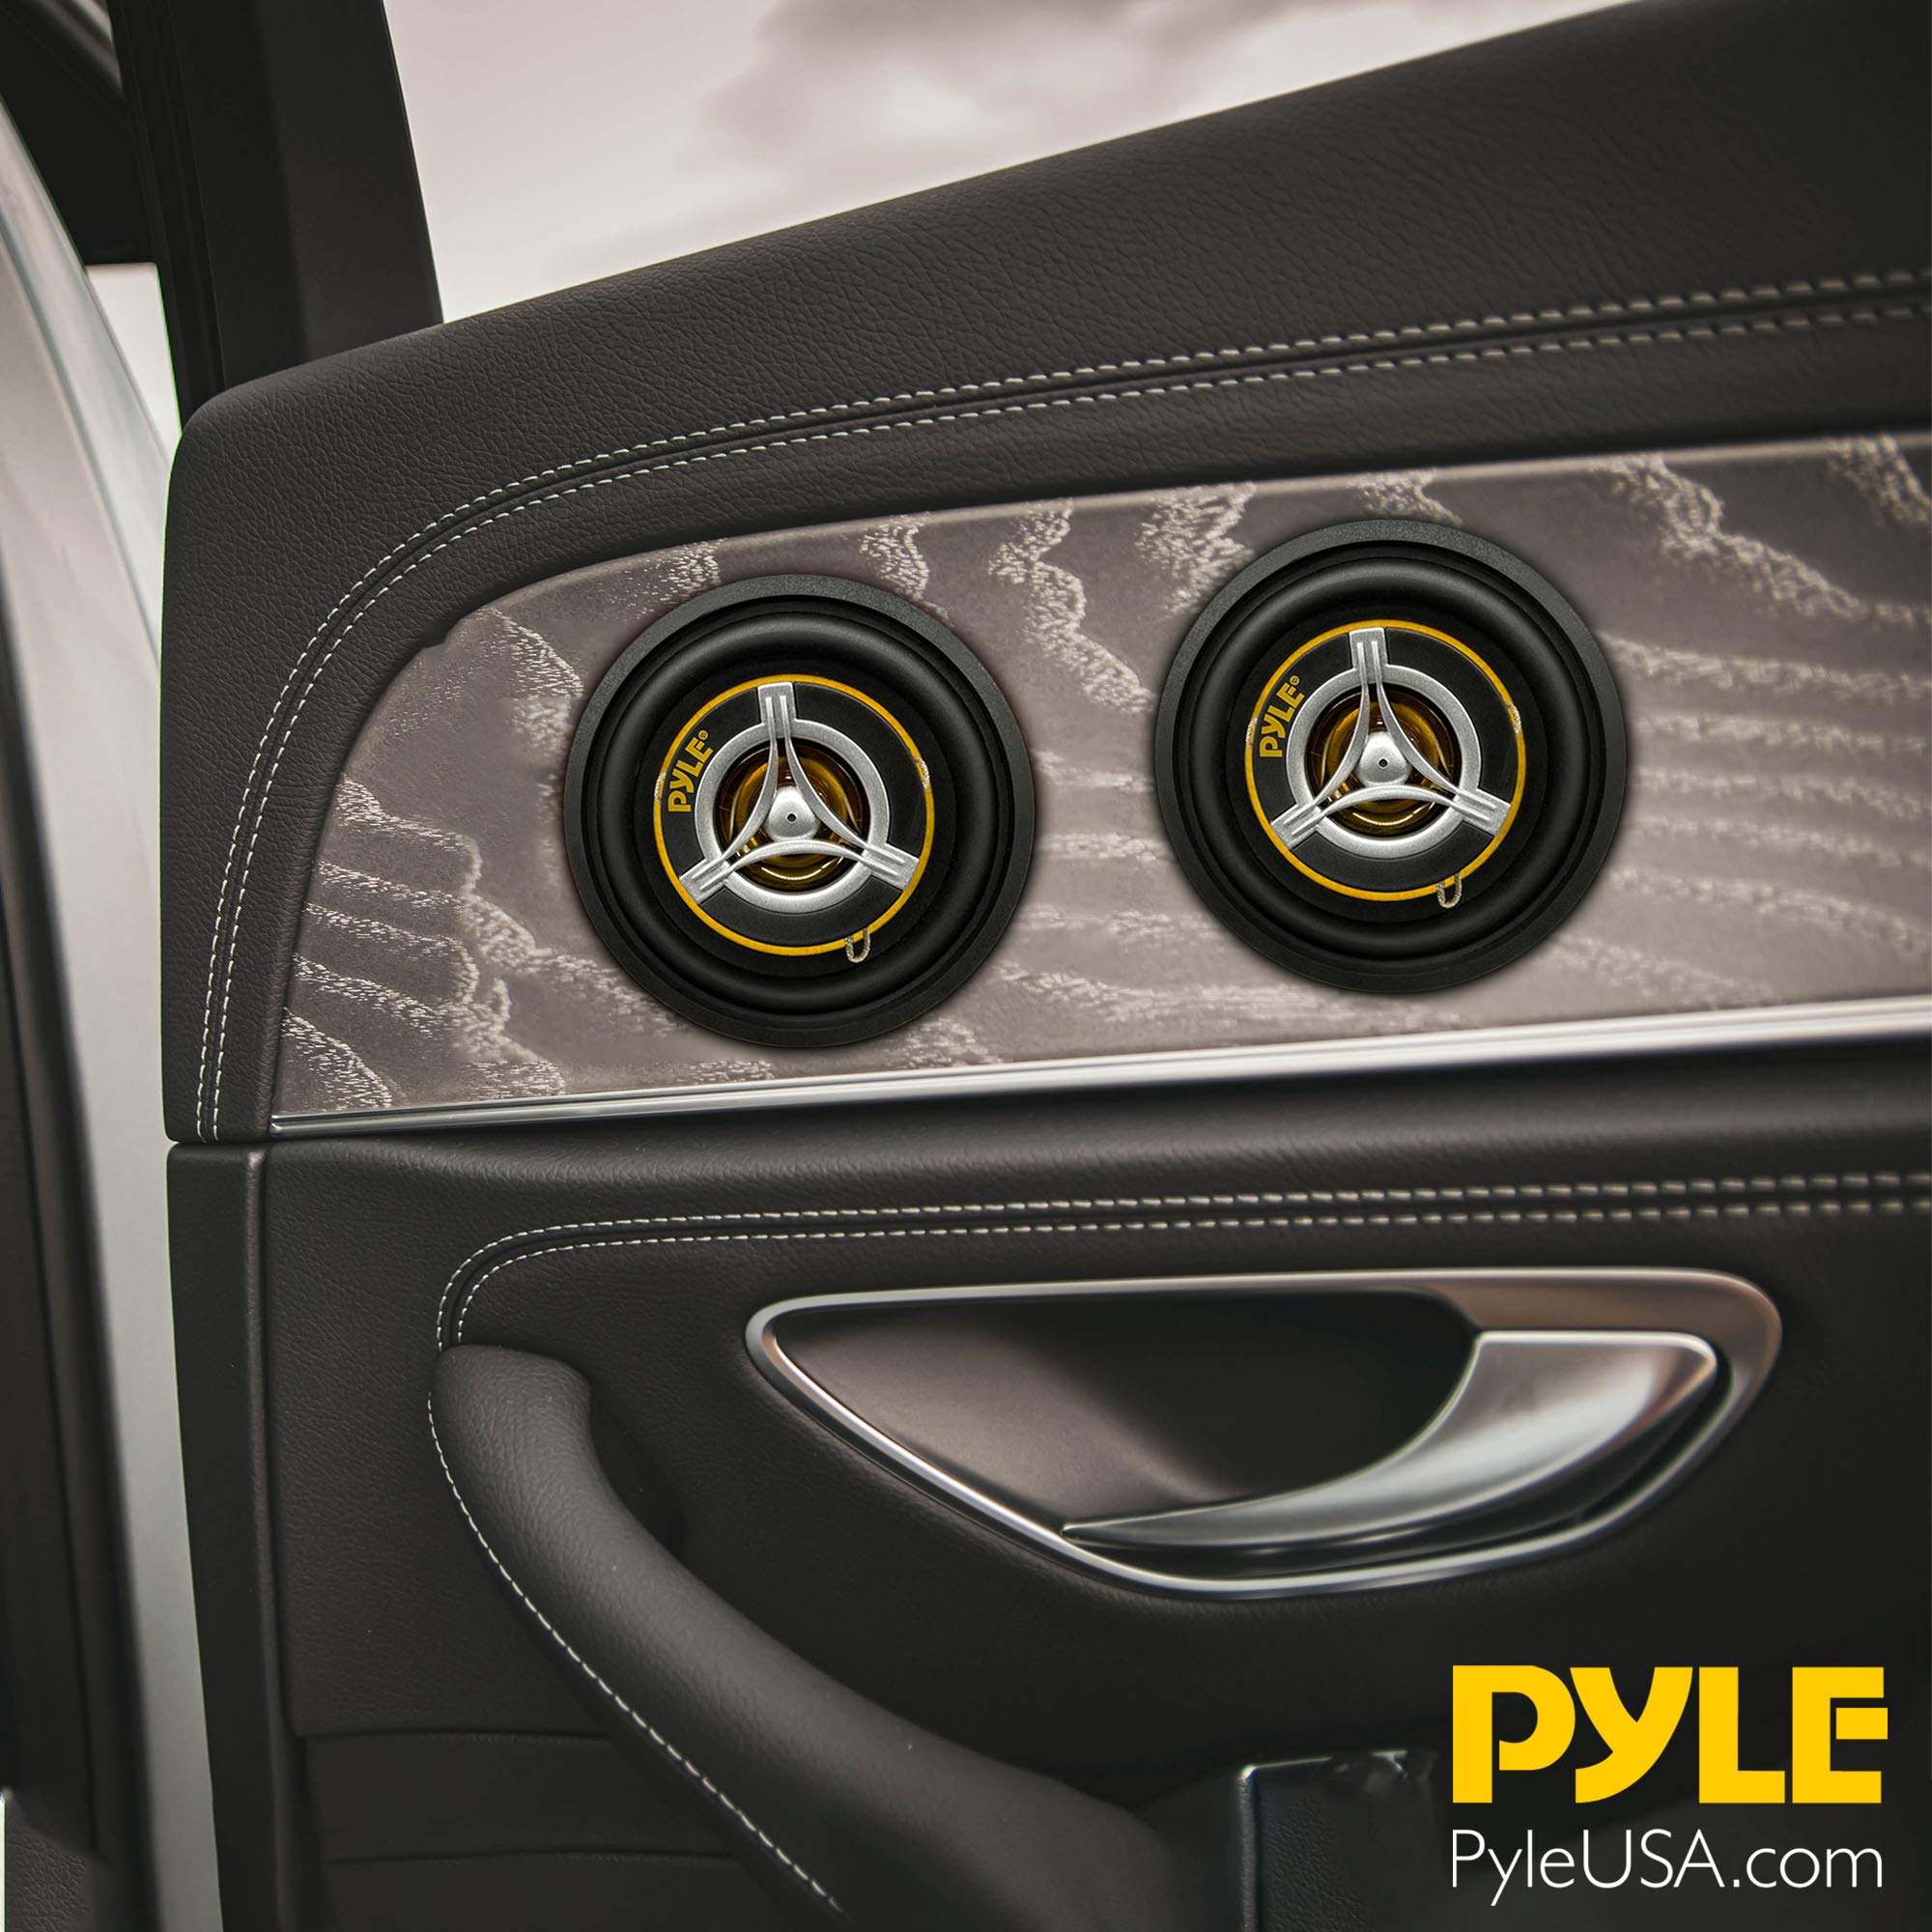 Pyle Car Two Way Speaker System - Pro 3.5 Inch 120 Watt 4 Ohm Mid Tweeter Component Audio Sound Speakers For Car Stereo w/ 20 Oz Magnet Structure, 1.65” Mount Depth Fits Standard OEM - Pyle PLG3.2